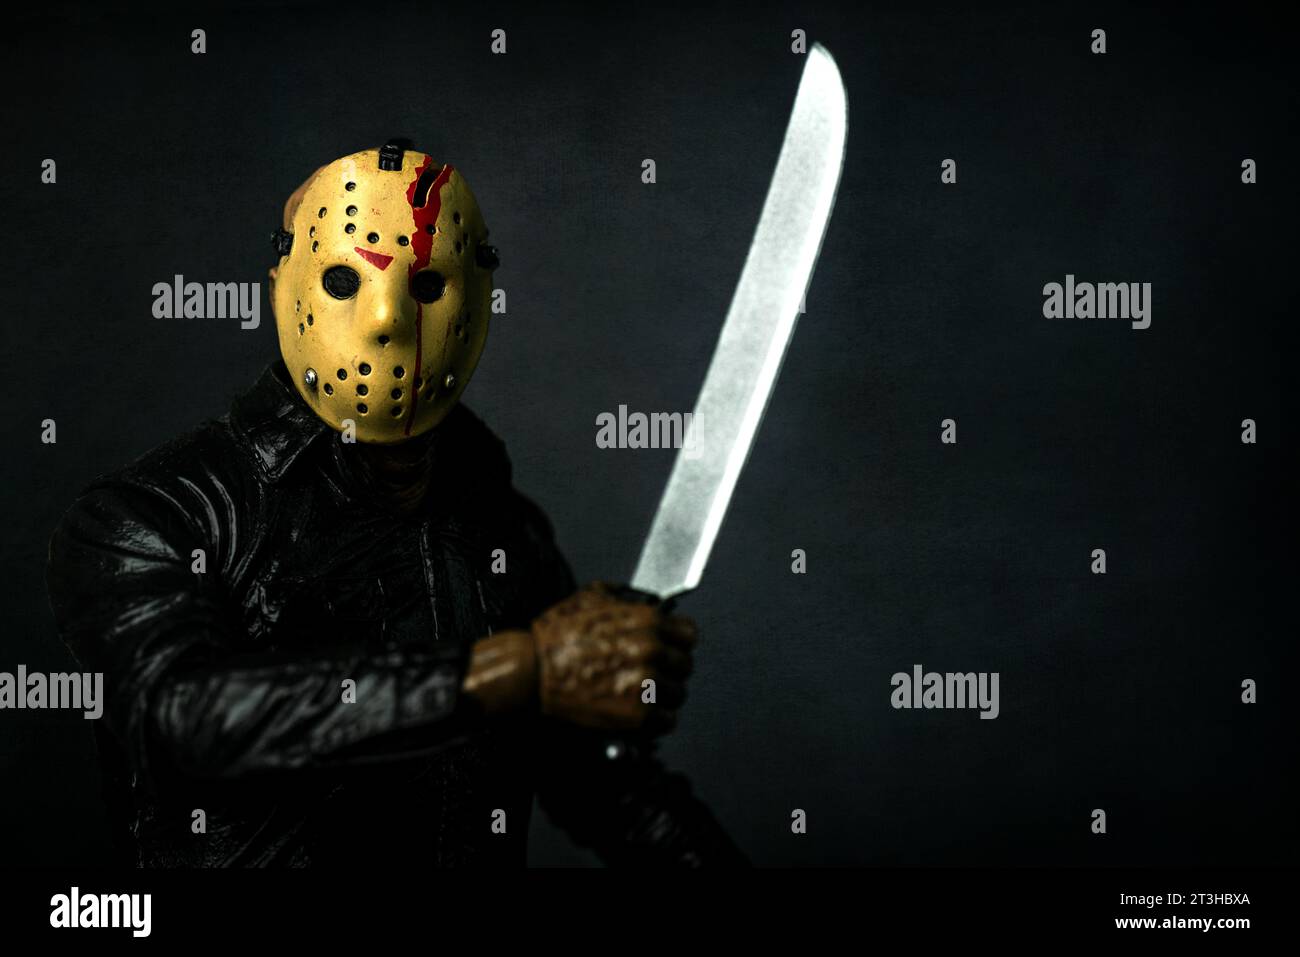 Close-up of figure of Jason Voorhees with machete main character of the film series Friday the 13th over grey background. Illustrative editorial Stock Photo